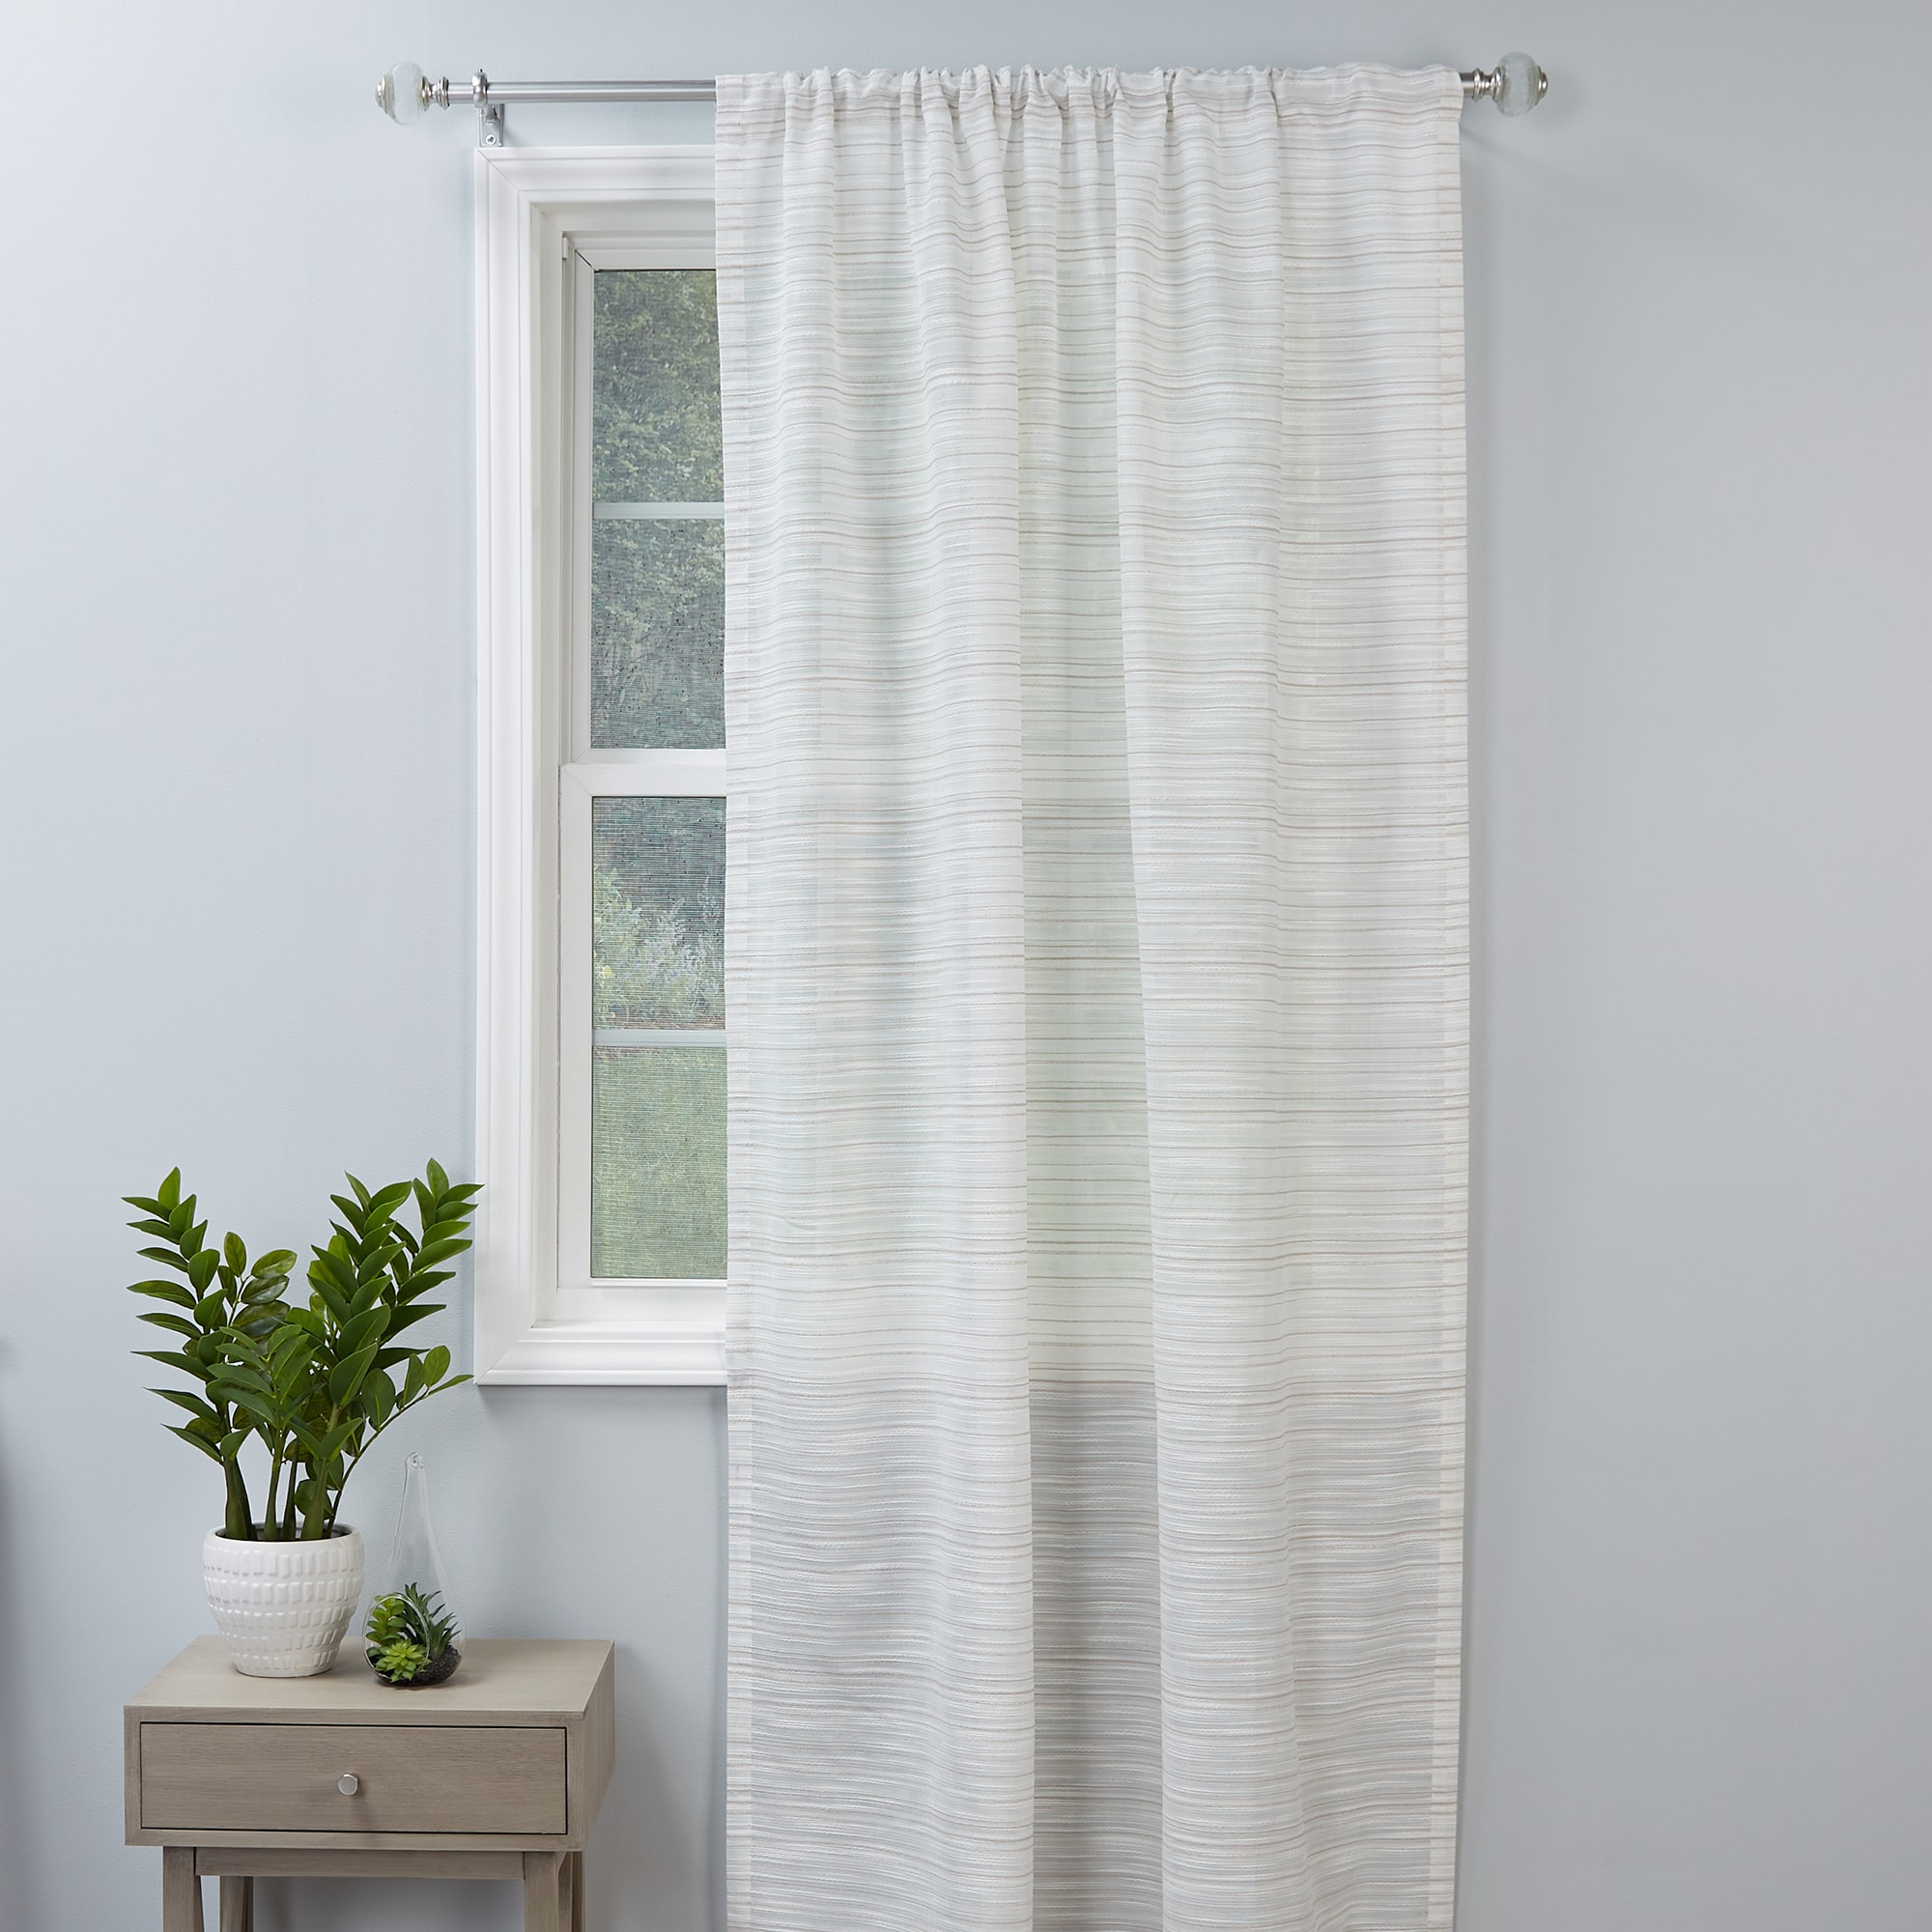 Rod at department the Curtains in & Light Filtering allen + Drapes Single Taupe roth Curtain 84-in Panel Pocket